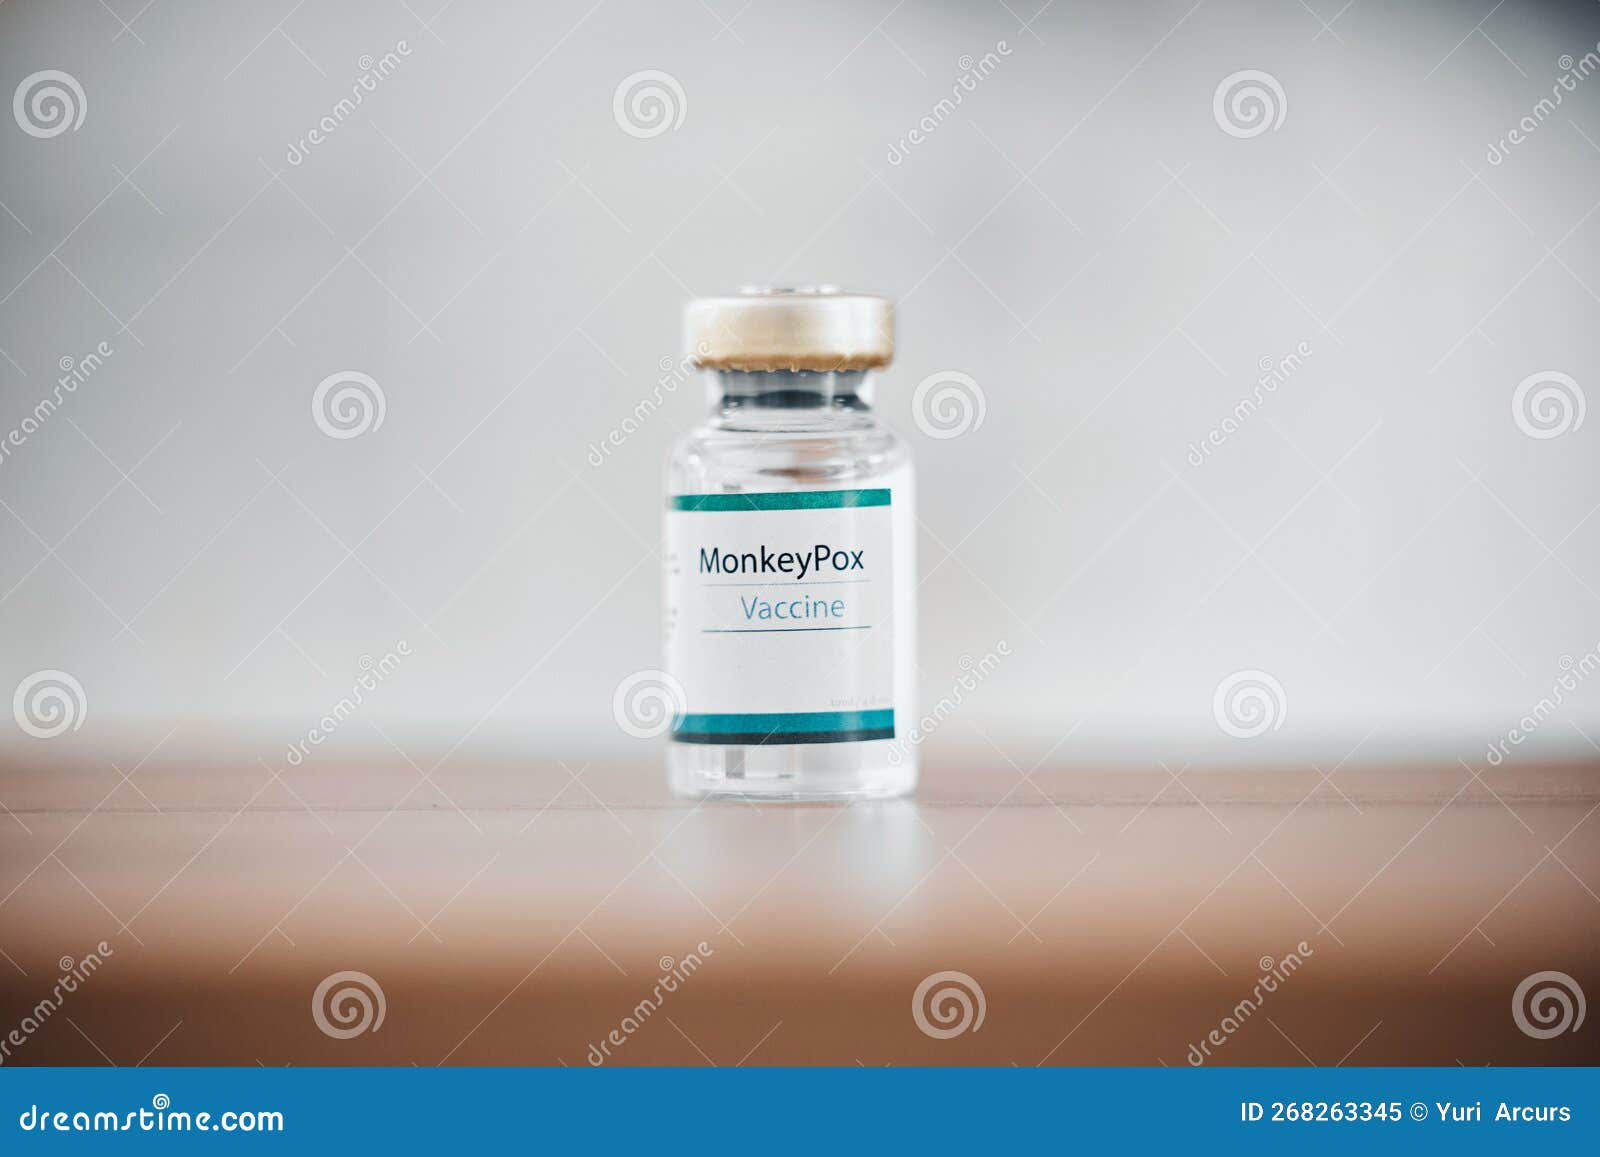 moneypox, hospital vaccine and bottle for healthcare, medical virus and cure for disease on a table. health, care and